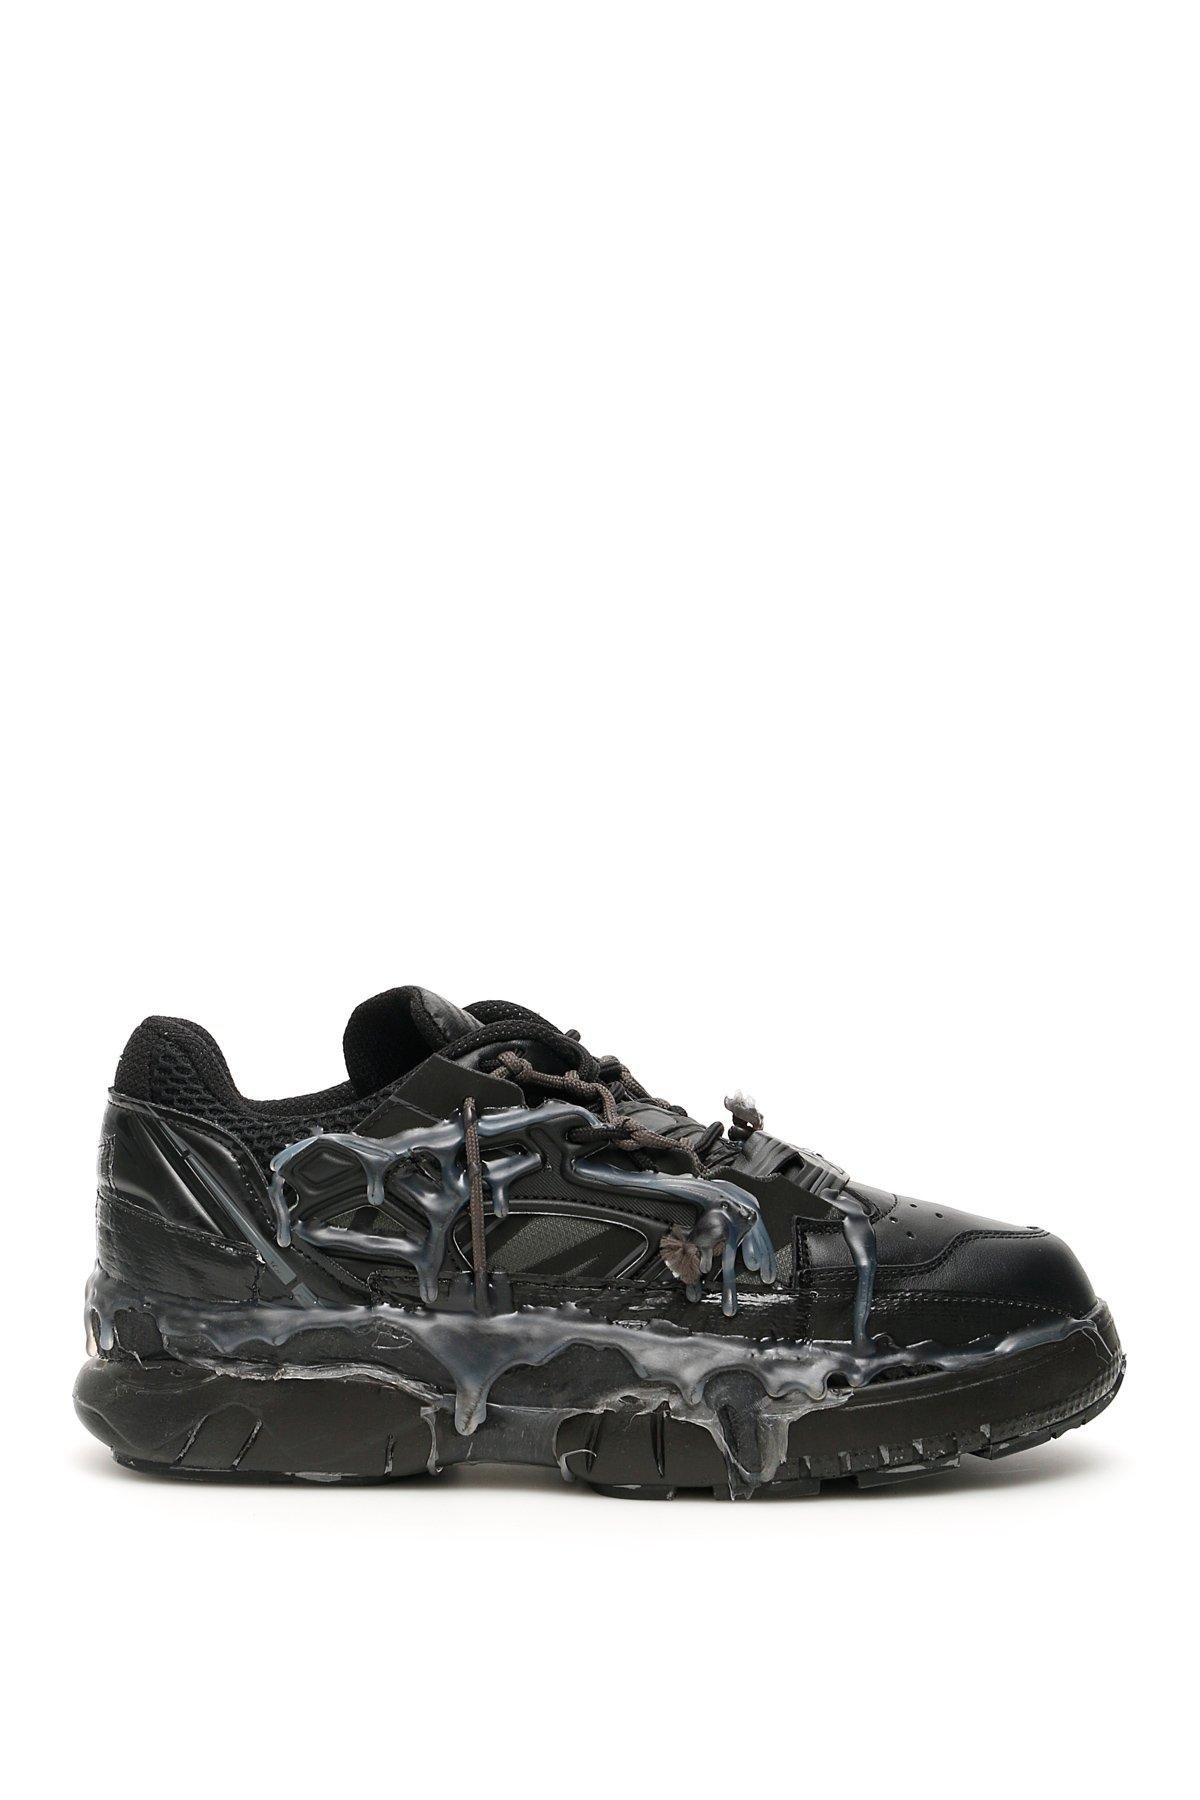 Maison Margiela Leather And Mesh Trainers in Black for Lyst